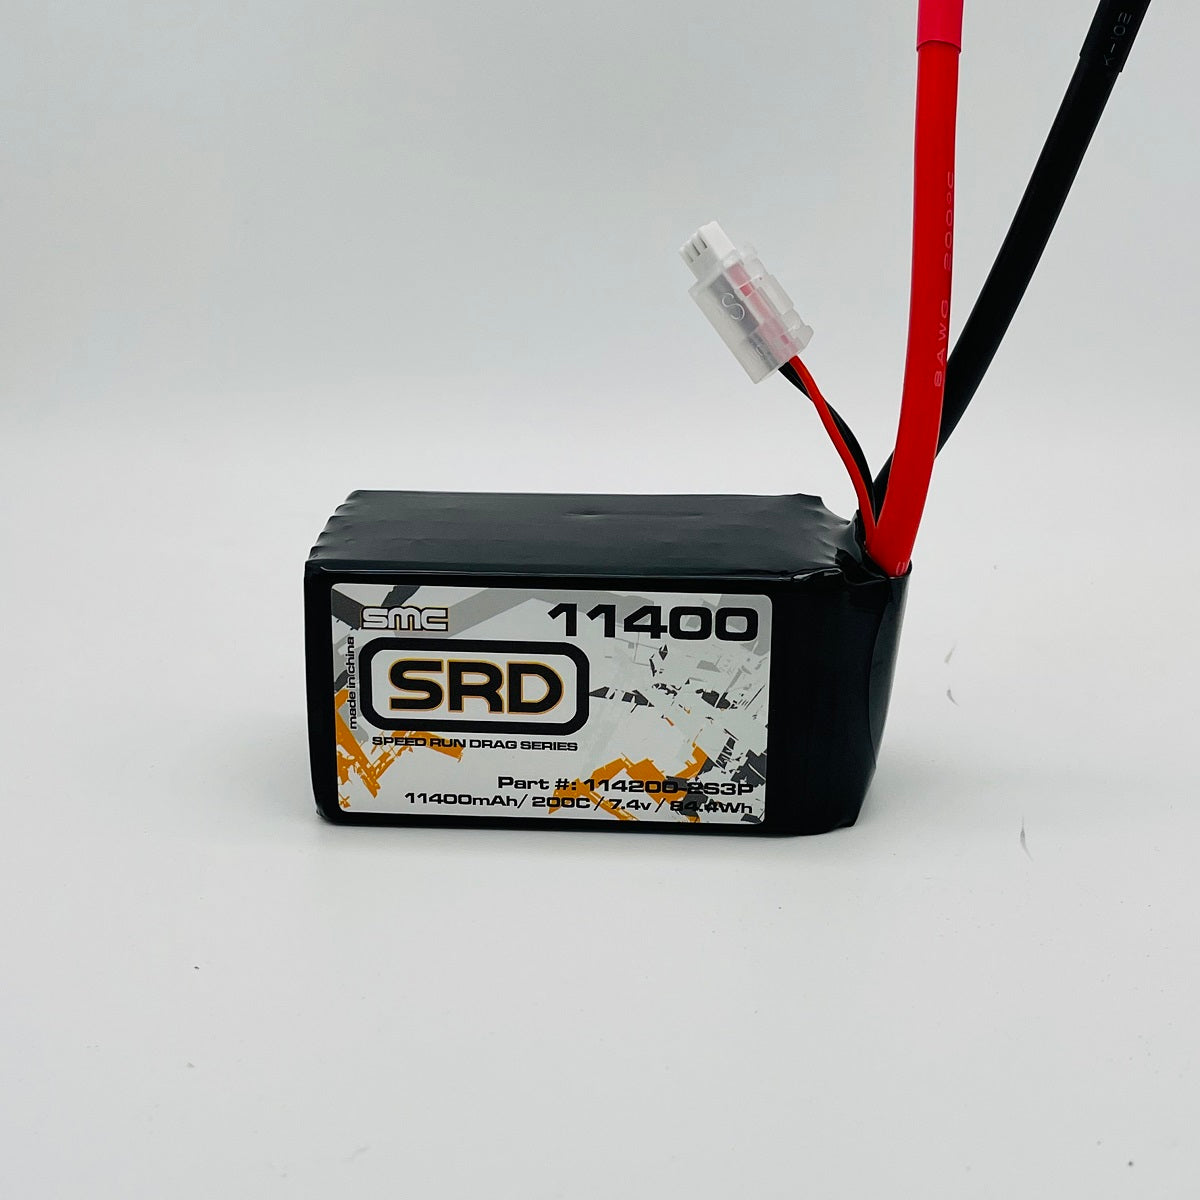 SMC SRD 7.4V-11400mAh-200C Shorty Softcase Drag Racing Pack No Connector  *Archived